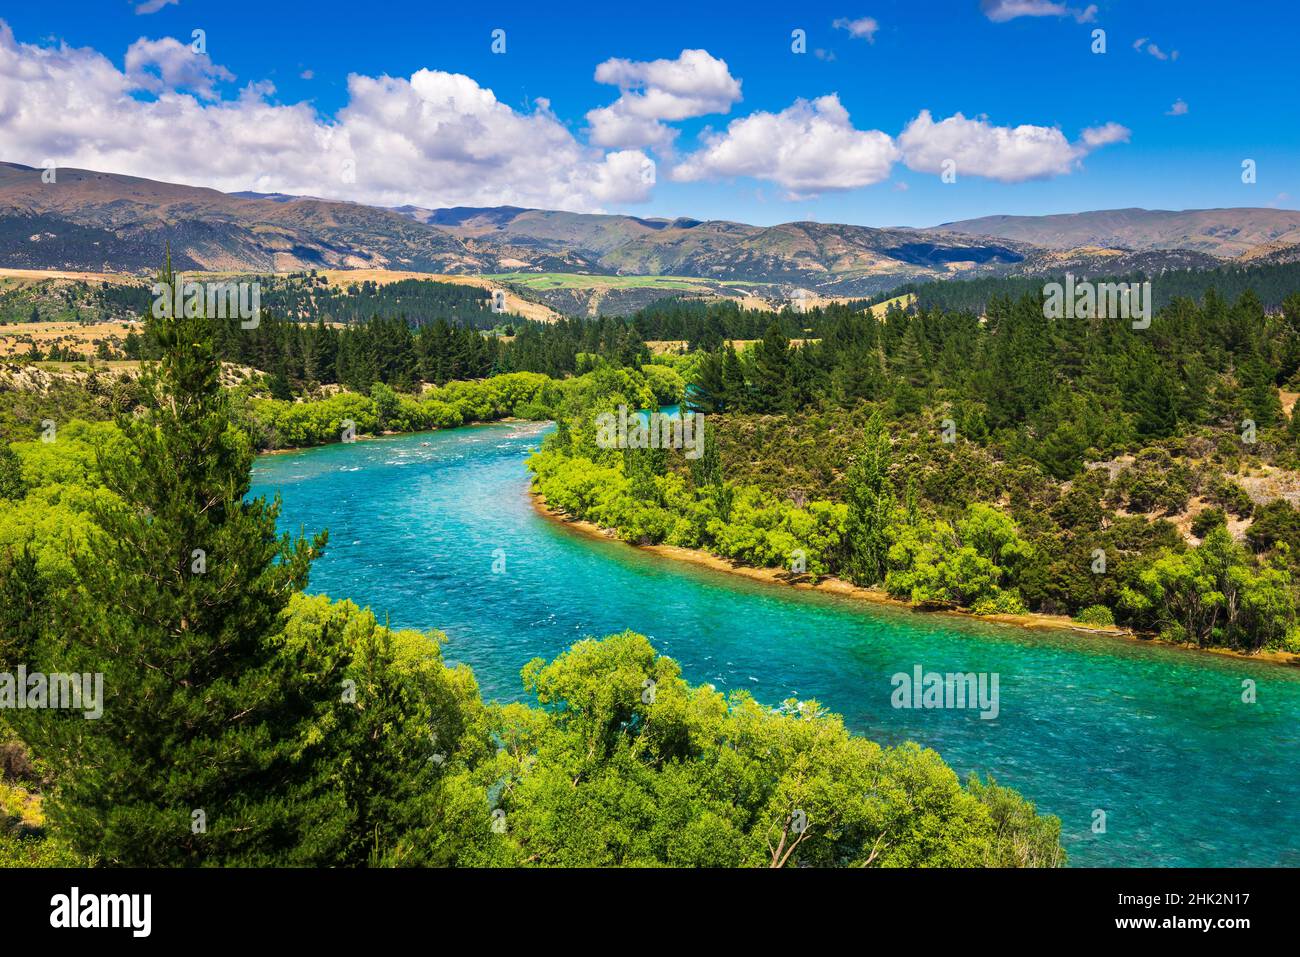 The Clutha River, Central Otago, South Island, New Zealand Stock Photo